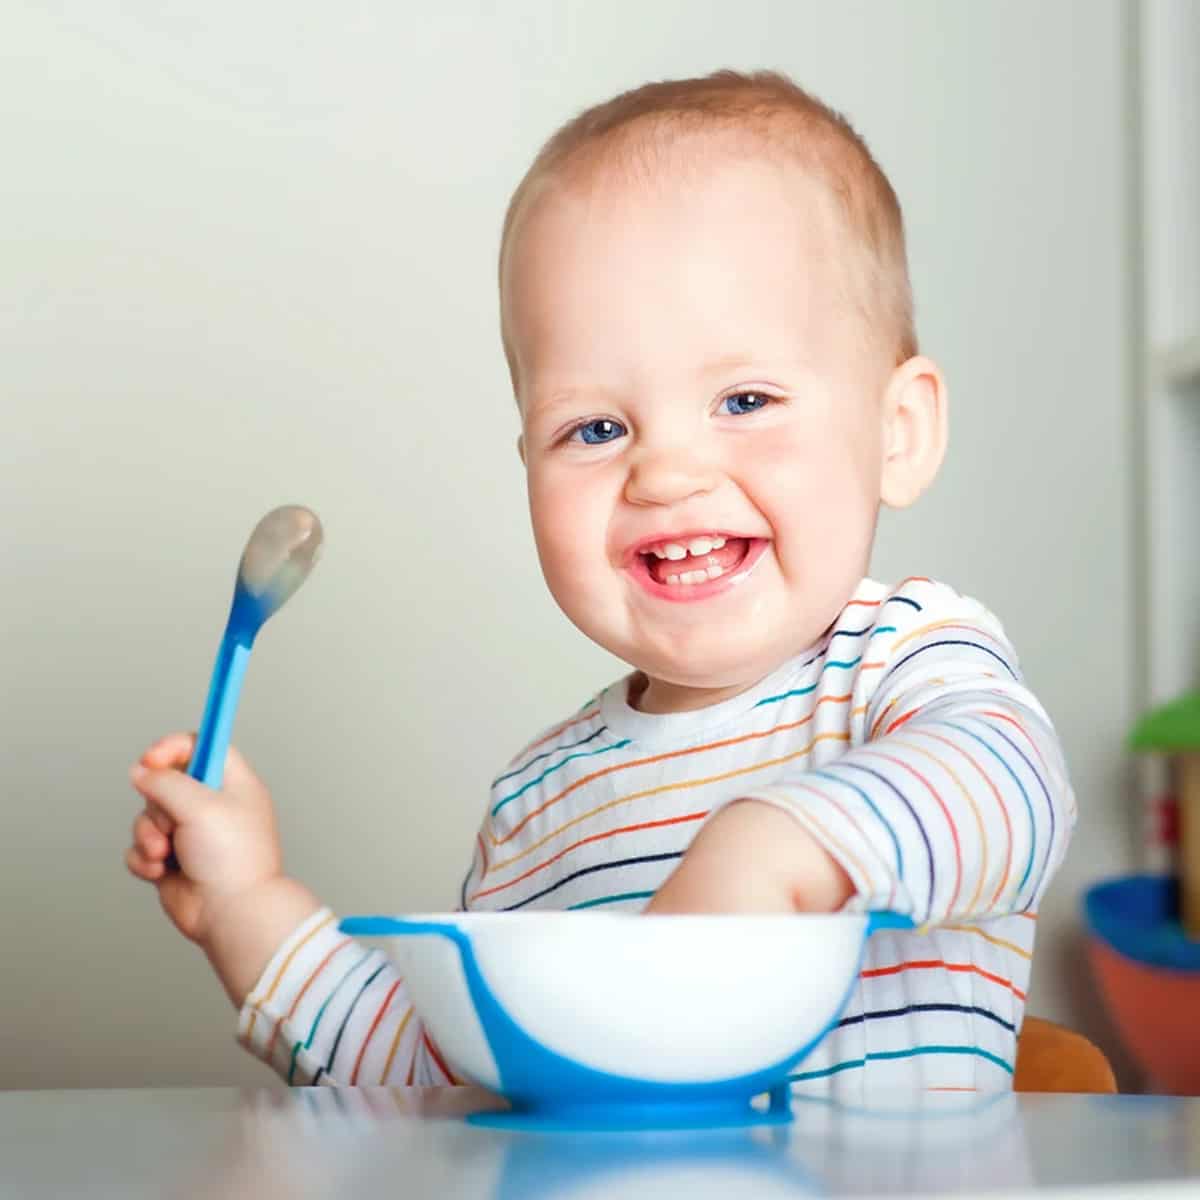 Sample Feeding Schedules for 1 Year Olds